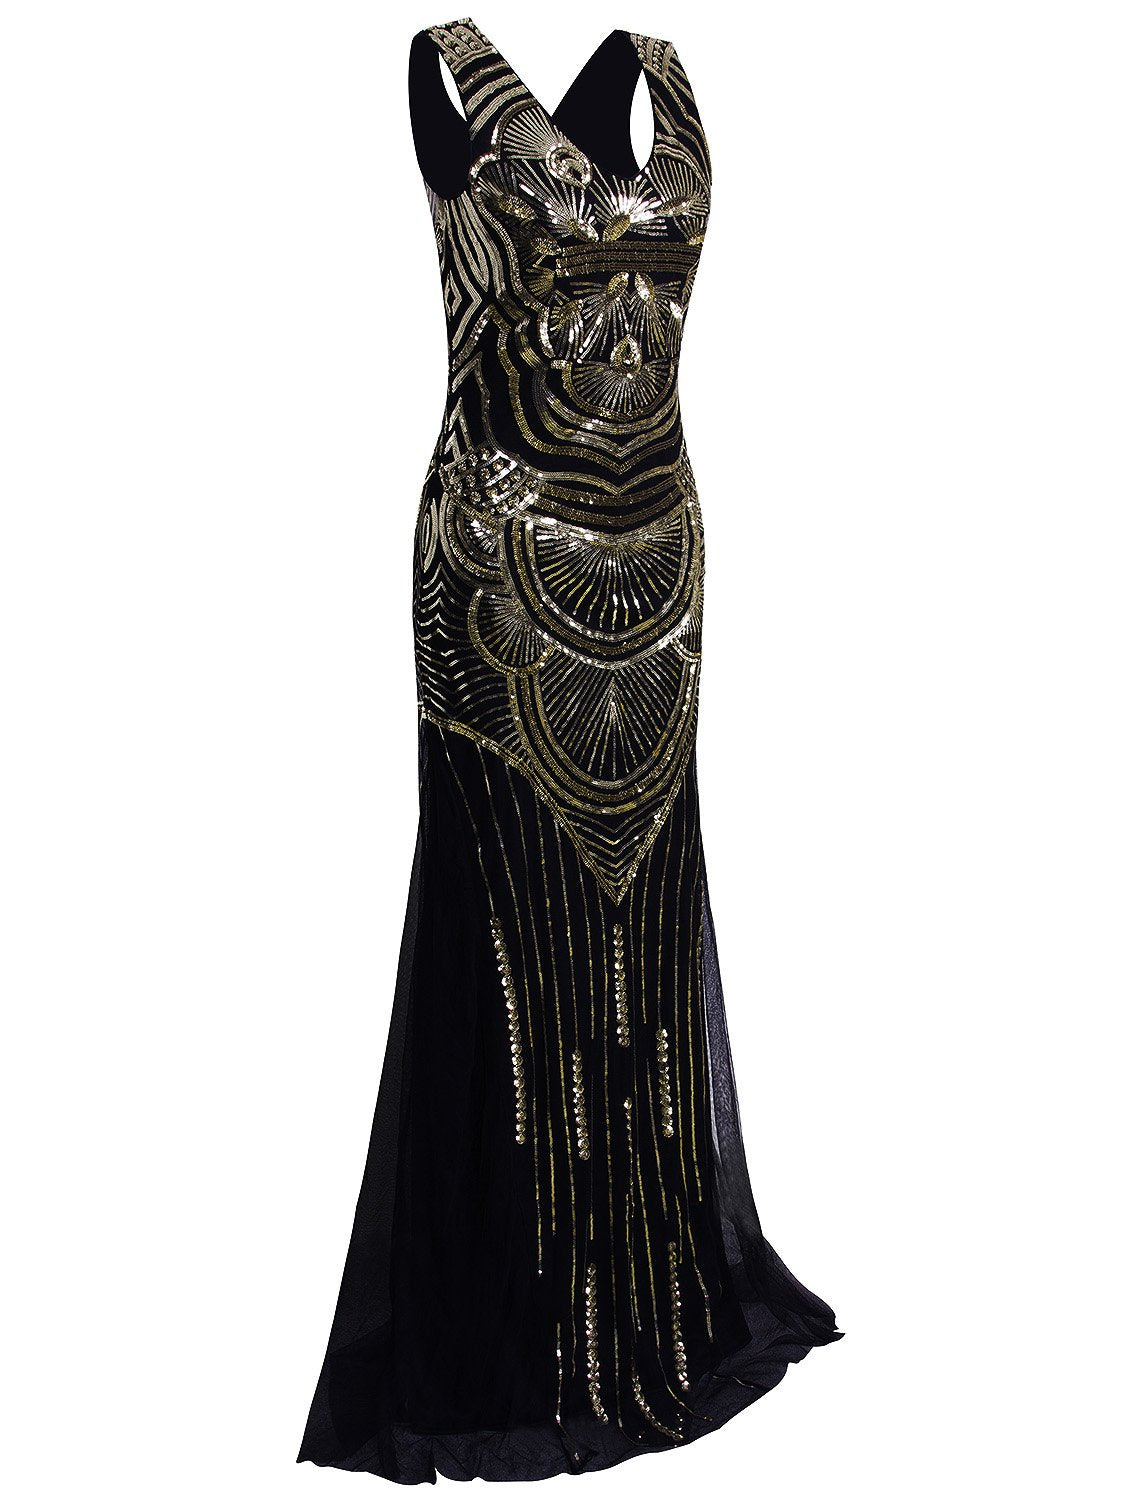 1920s style ball gown